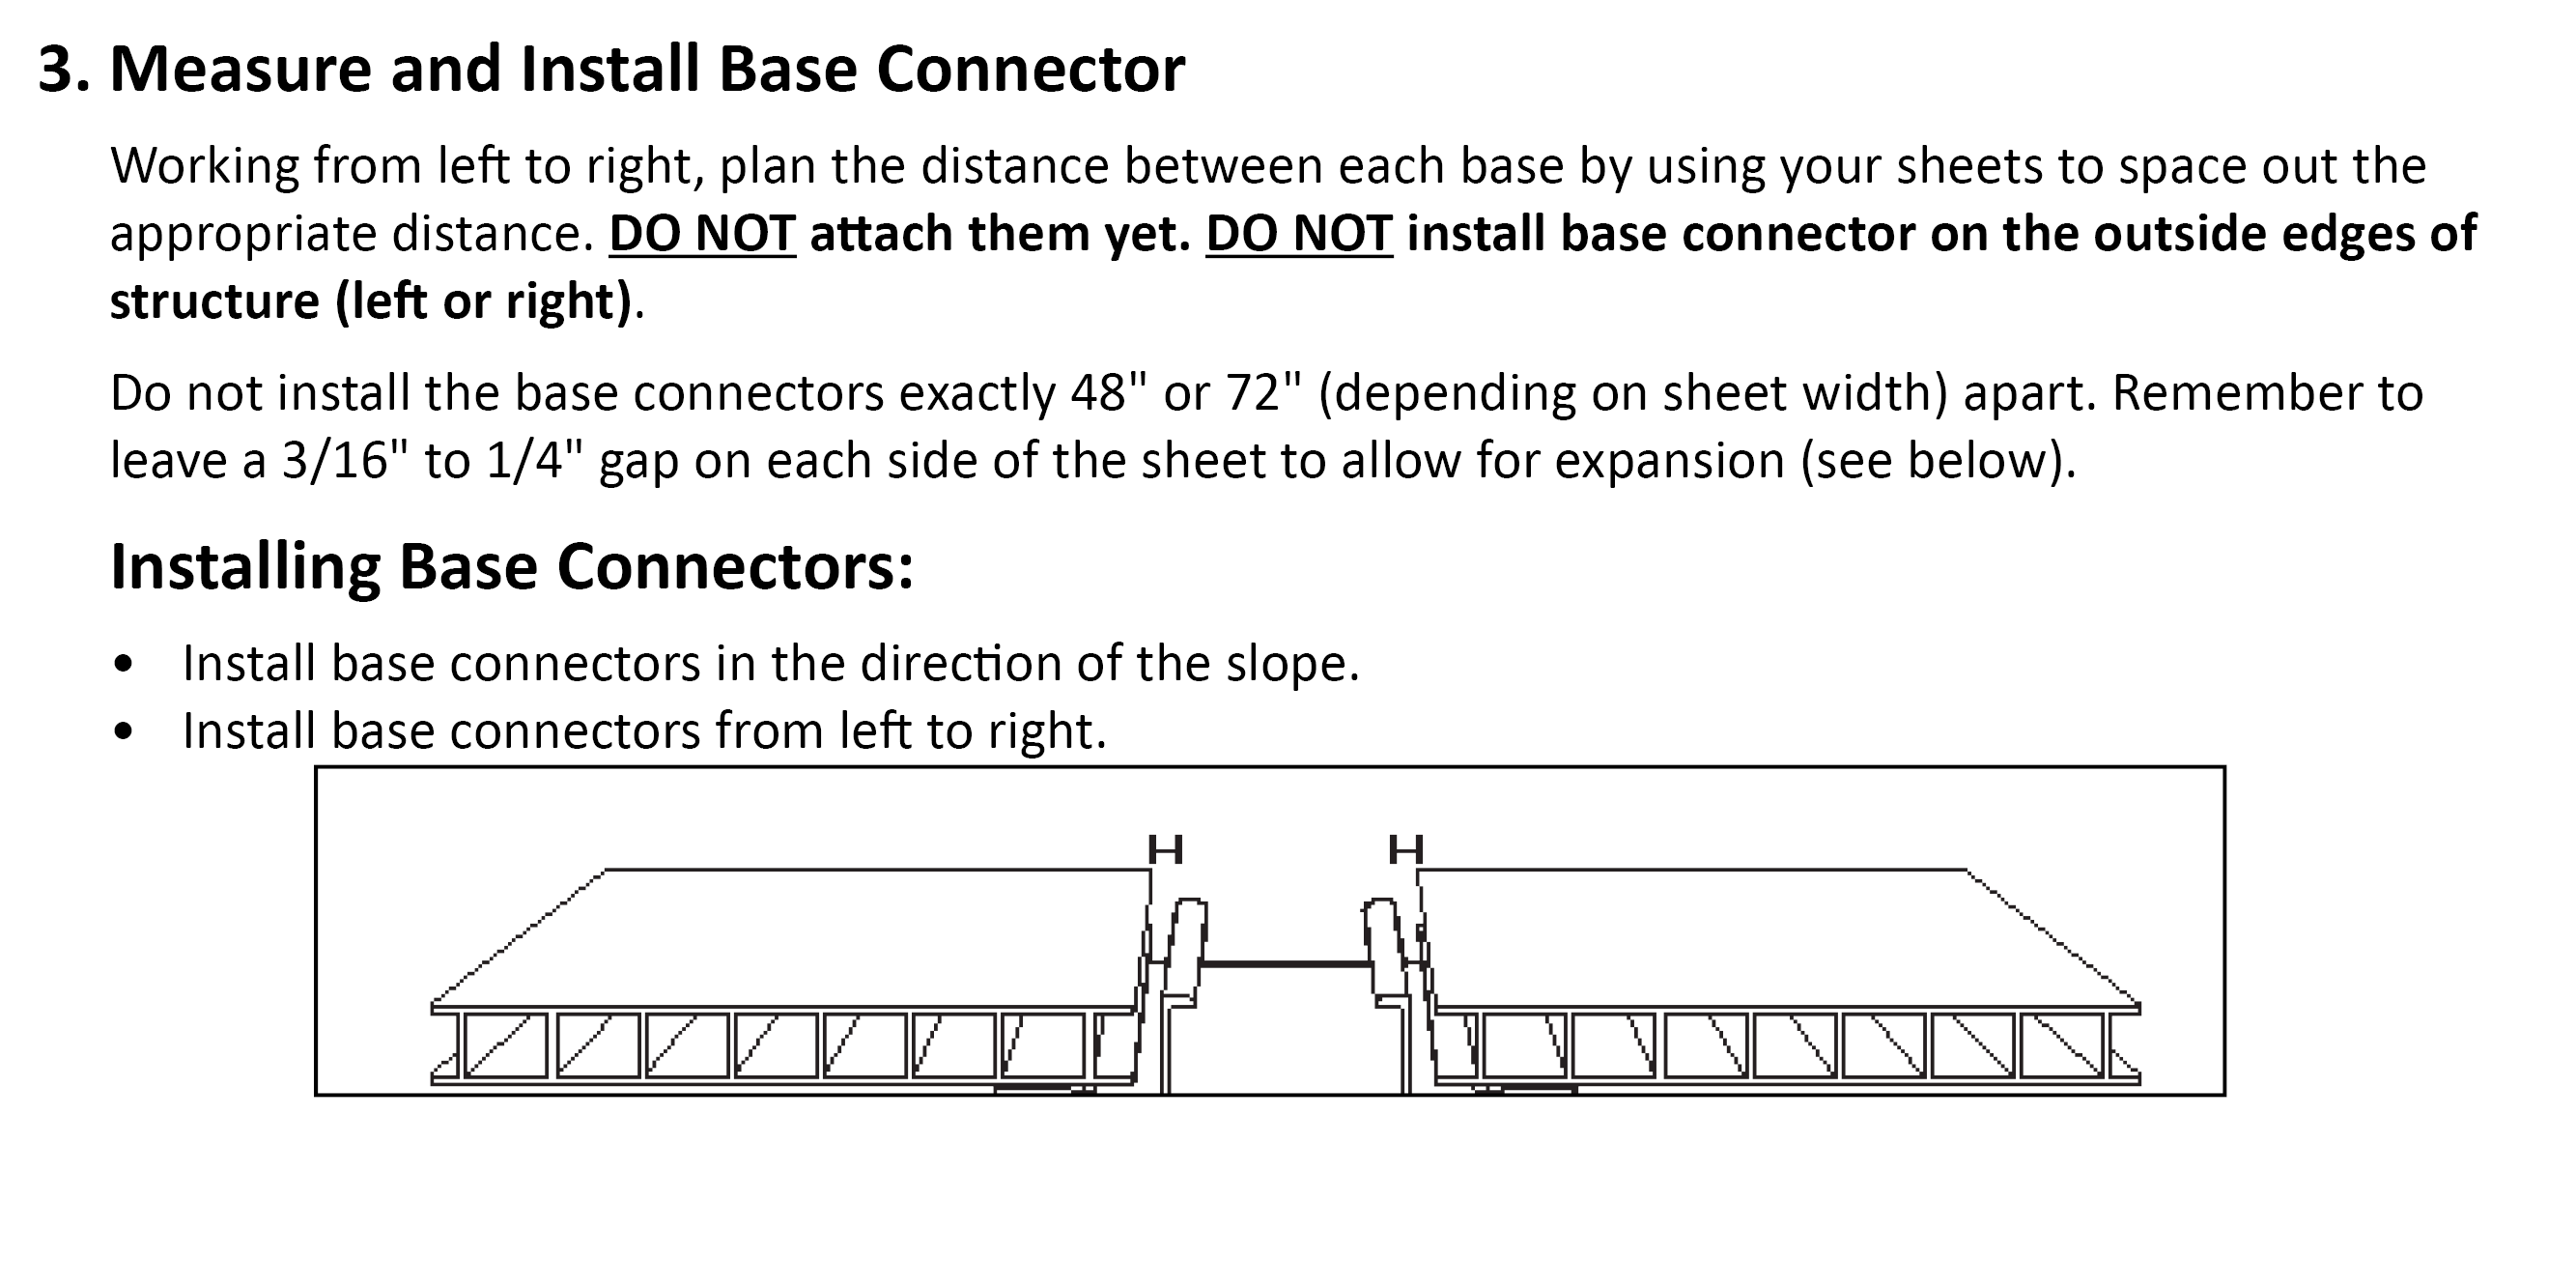 Measure and Install Base Connector